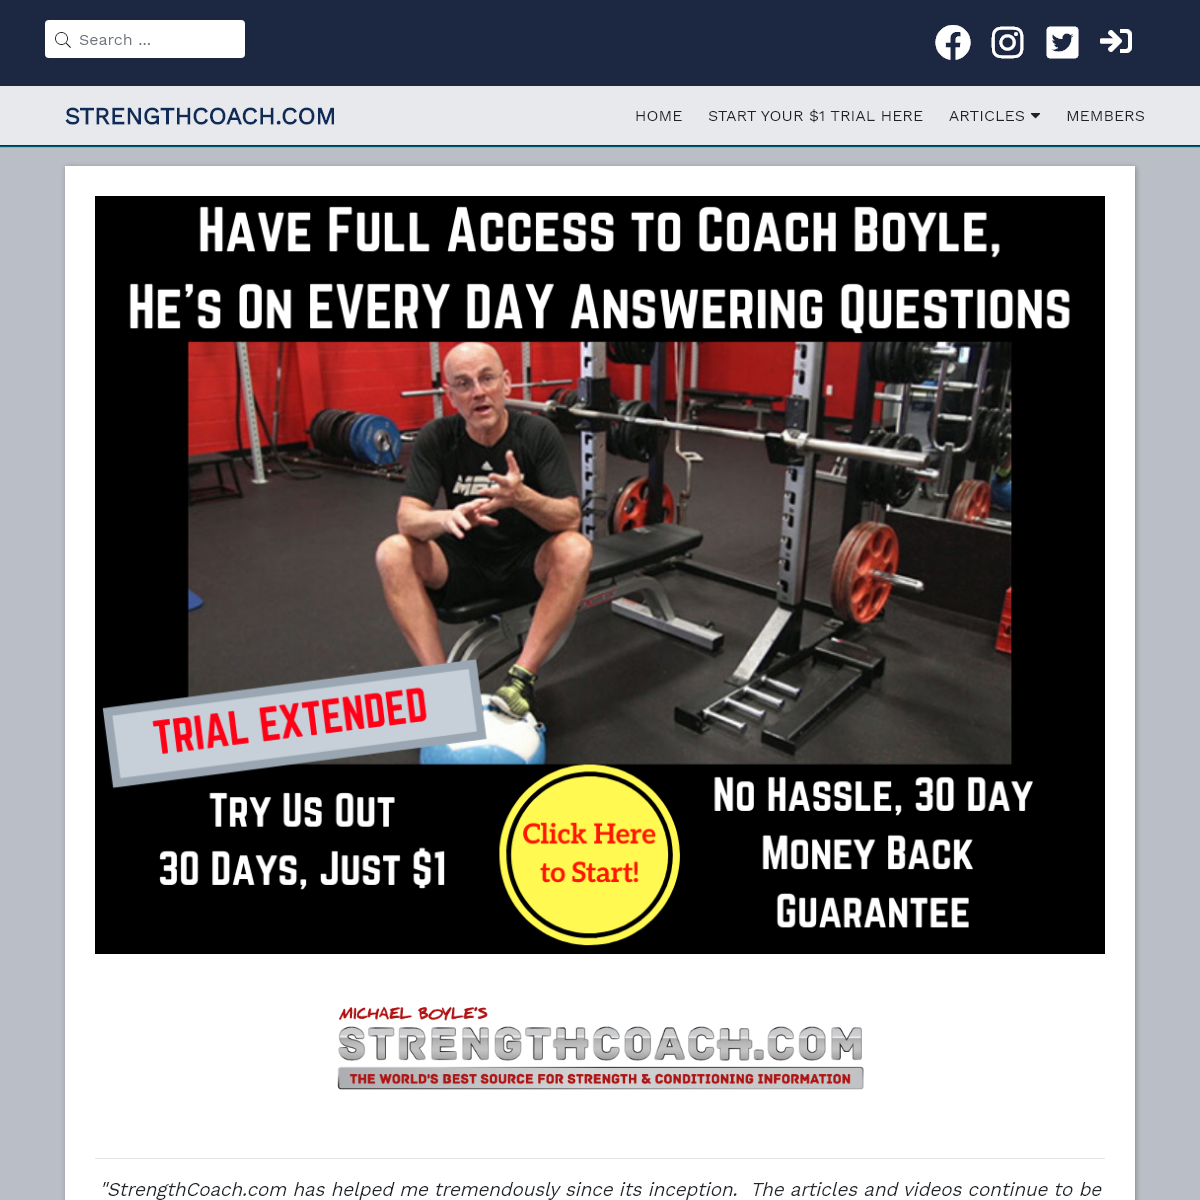 Strength Coach.com Strength and Conditioning Sports Training Information from Mike Boyle